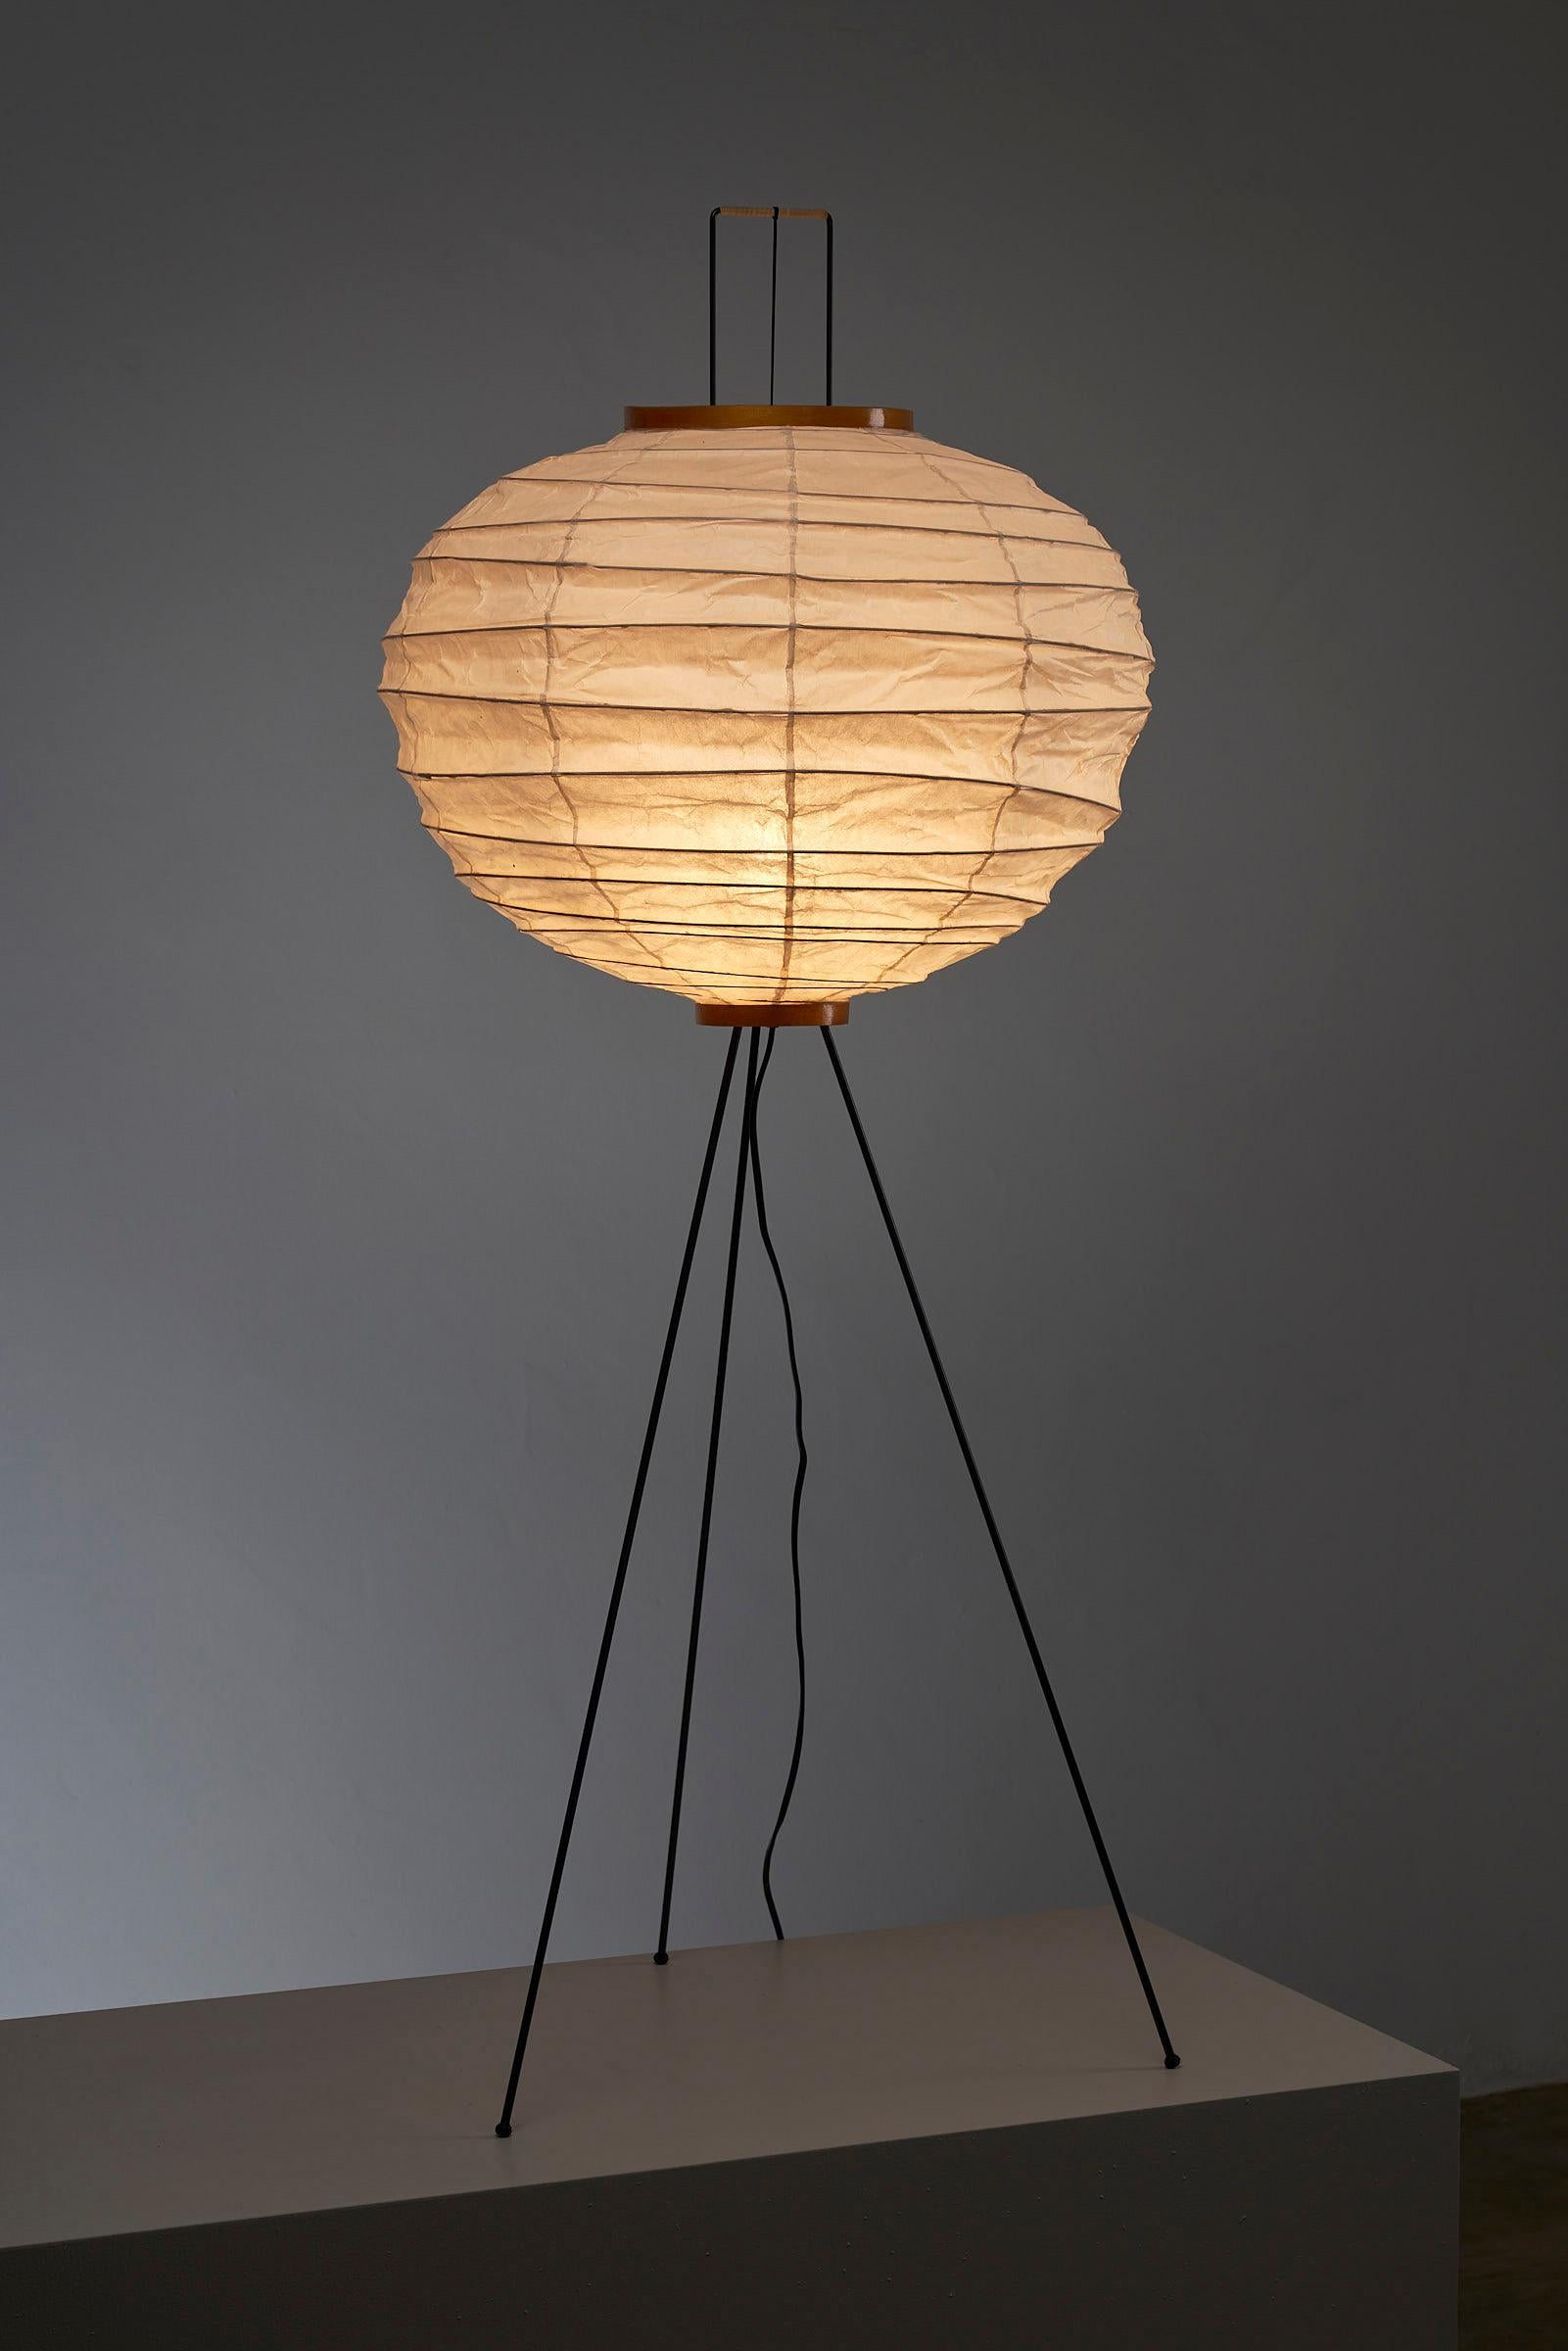 What makes this particular Akari lamp even more exceptional is its pristine condition and history. This lamp has never been used before, preserved in its original state since its production in the 1950s. Such a well-preserved, untouched piece is a